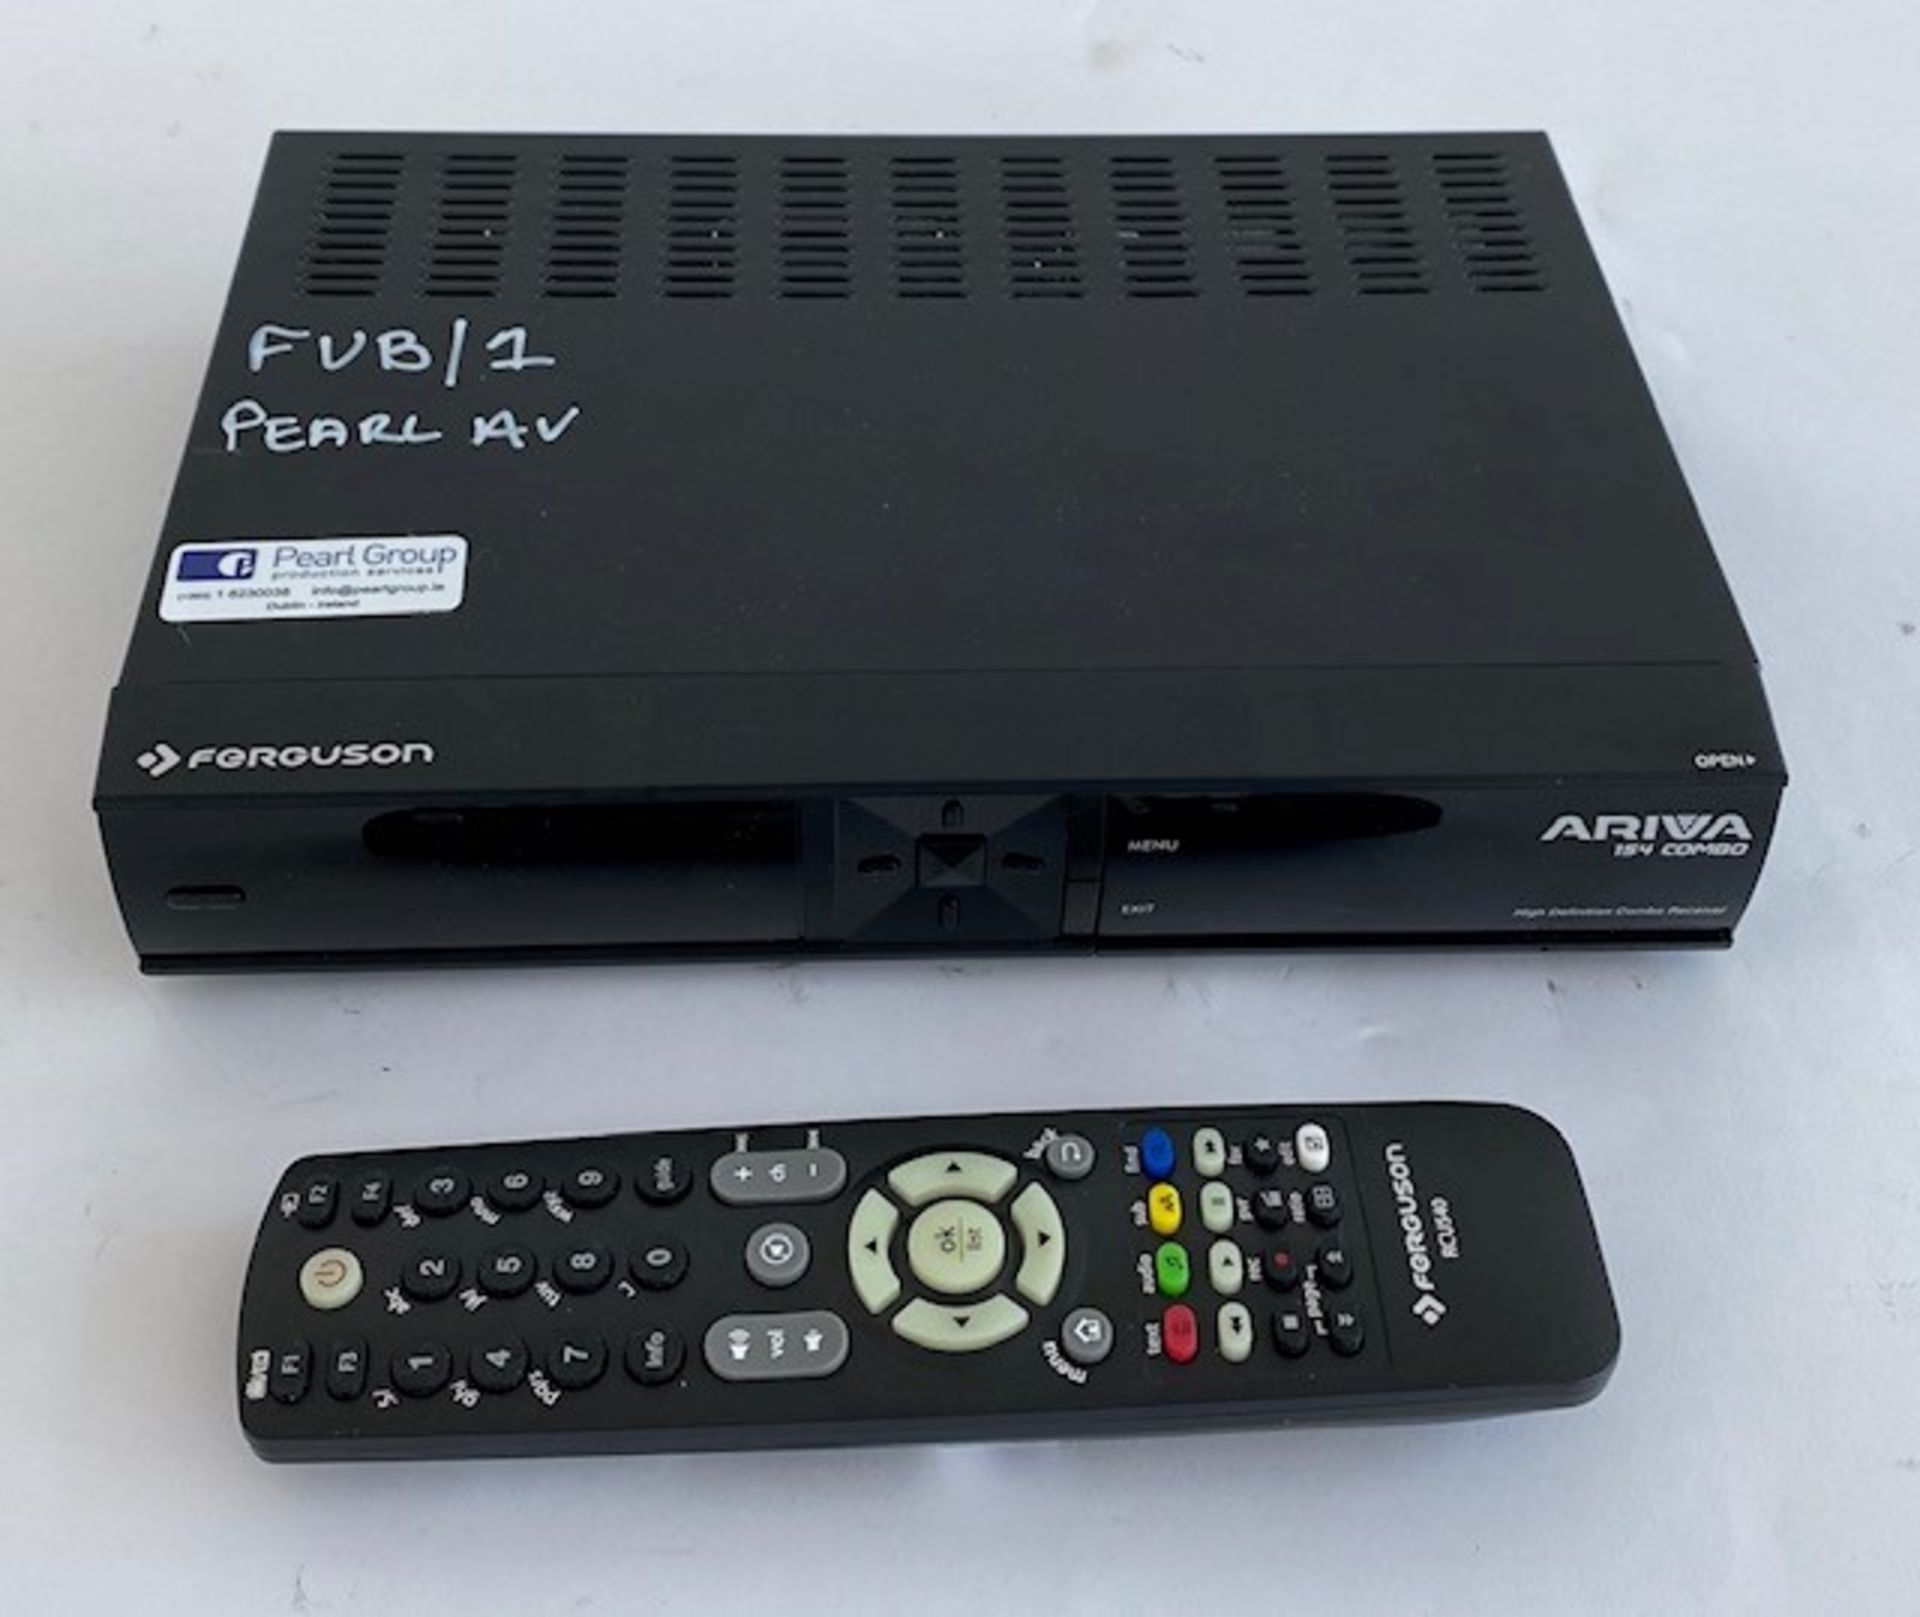 1 x Ferguson Ariva 154 Combo Freeview box Inc. Remote And PSU In A FlighthCase - Ref: 160 -